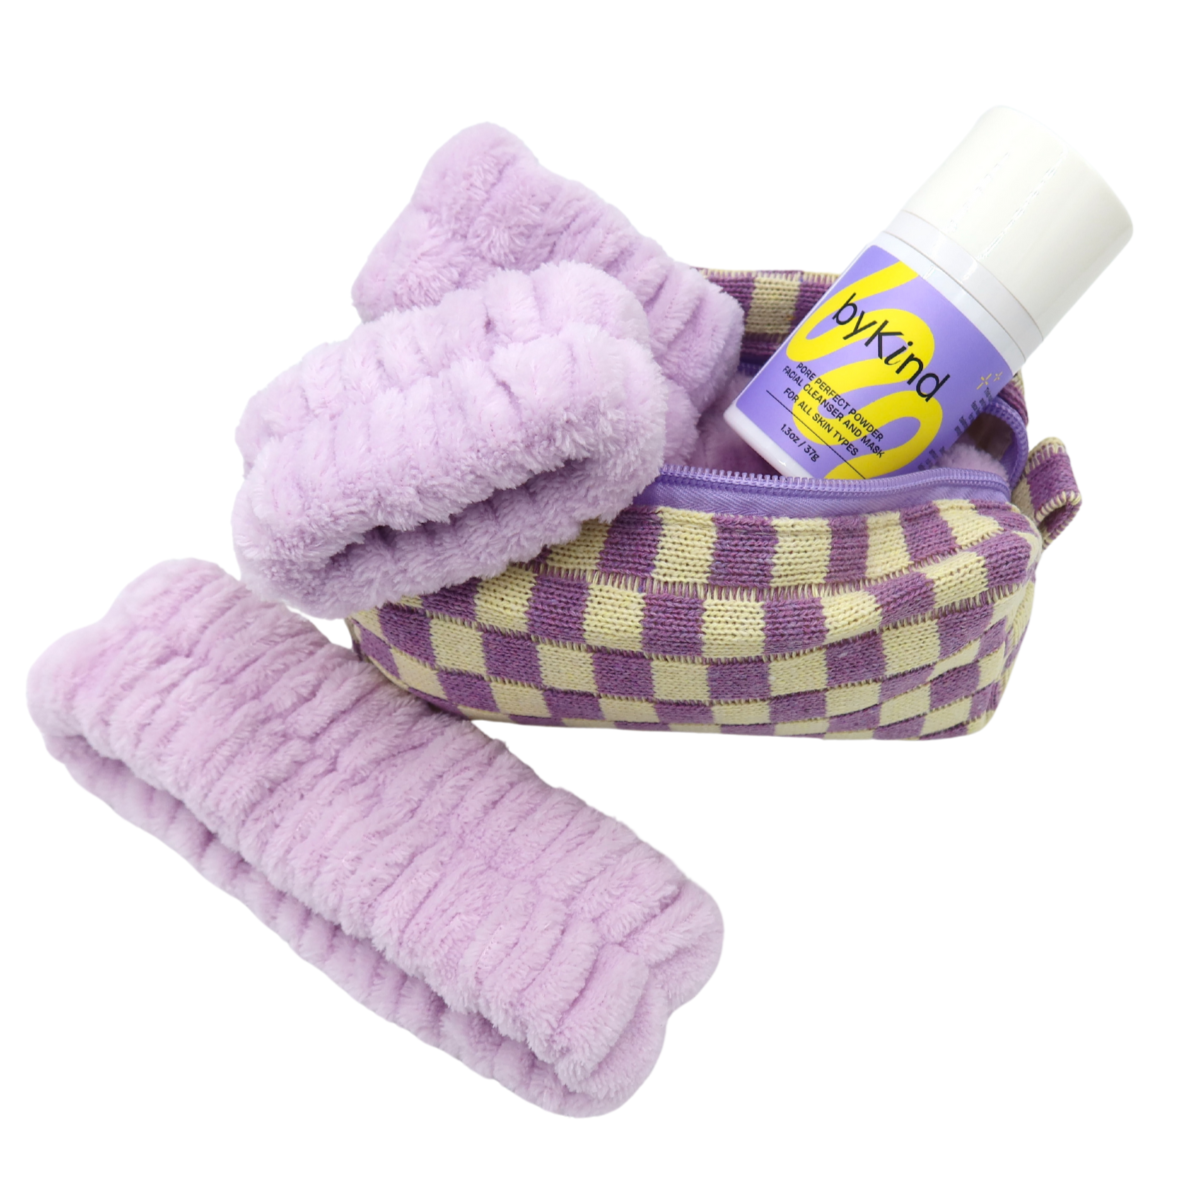 microfiber headband and wristbands with bottle of facial cleanser and a checkered toiletry bag